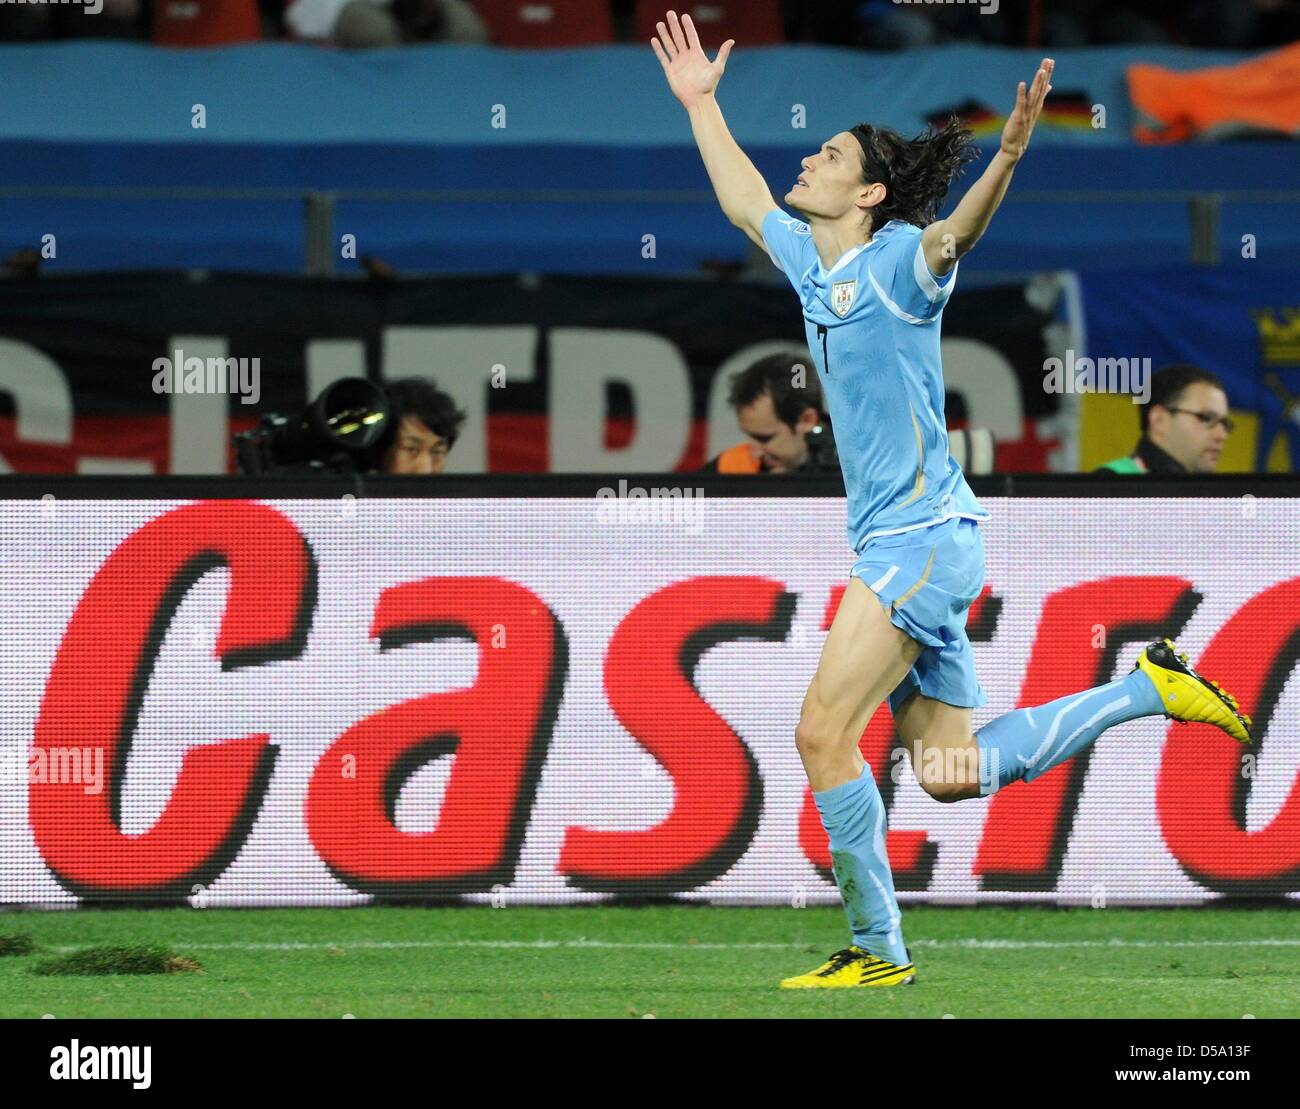 Uruguay's Edinson Cavani celebrates after equalising 1-1 during the 2010 FIFA World Cup third place match between Uruguay and Germany at the Nelson Mandela Bay Stadium in Port Elizabeth, South Africa 10 July 2010. Photo: Marcus Brandt dpa - Please refer to http://dpaq.de/FIFA-WM2010-TC Stock Photo